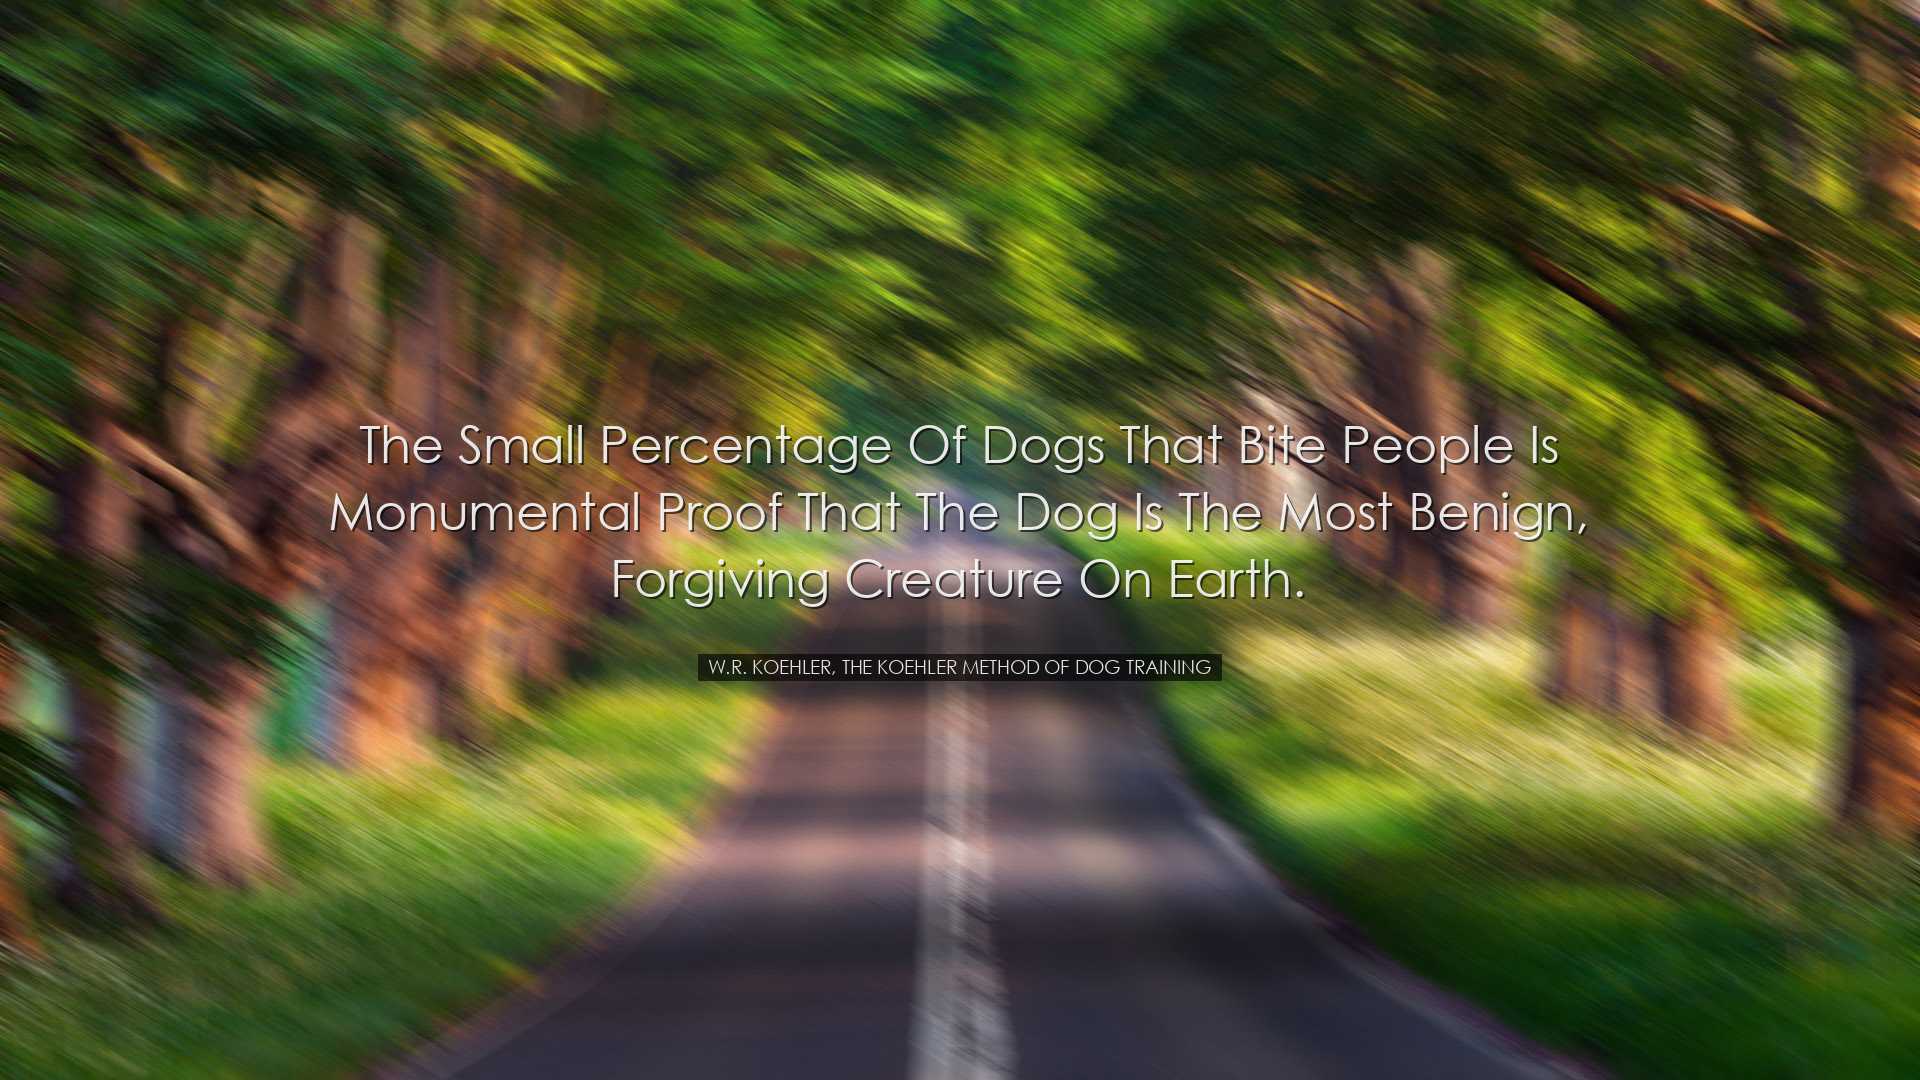 The small percentage of dogs that bite people is monumental proof